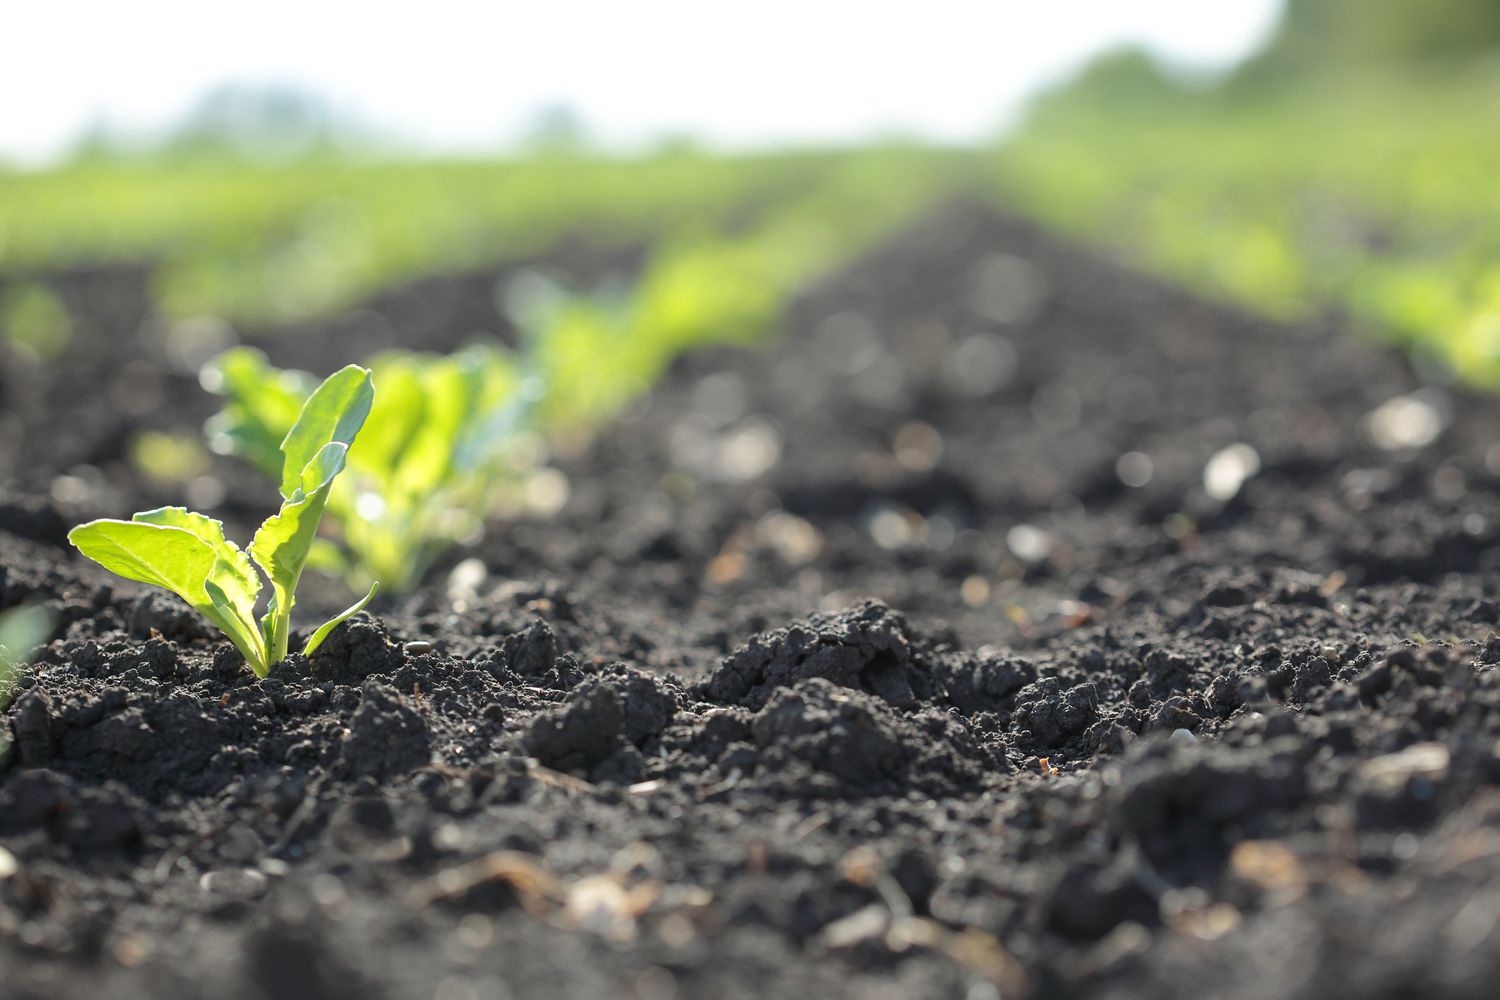 How Do Conservation Plowing And Crop Rotation Contribute To Soil Conservation?